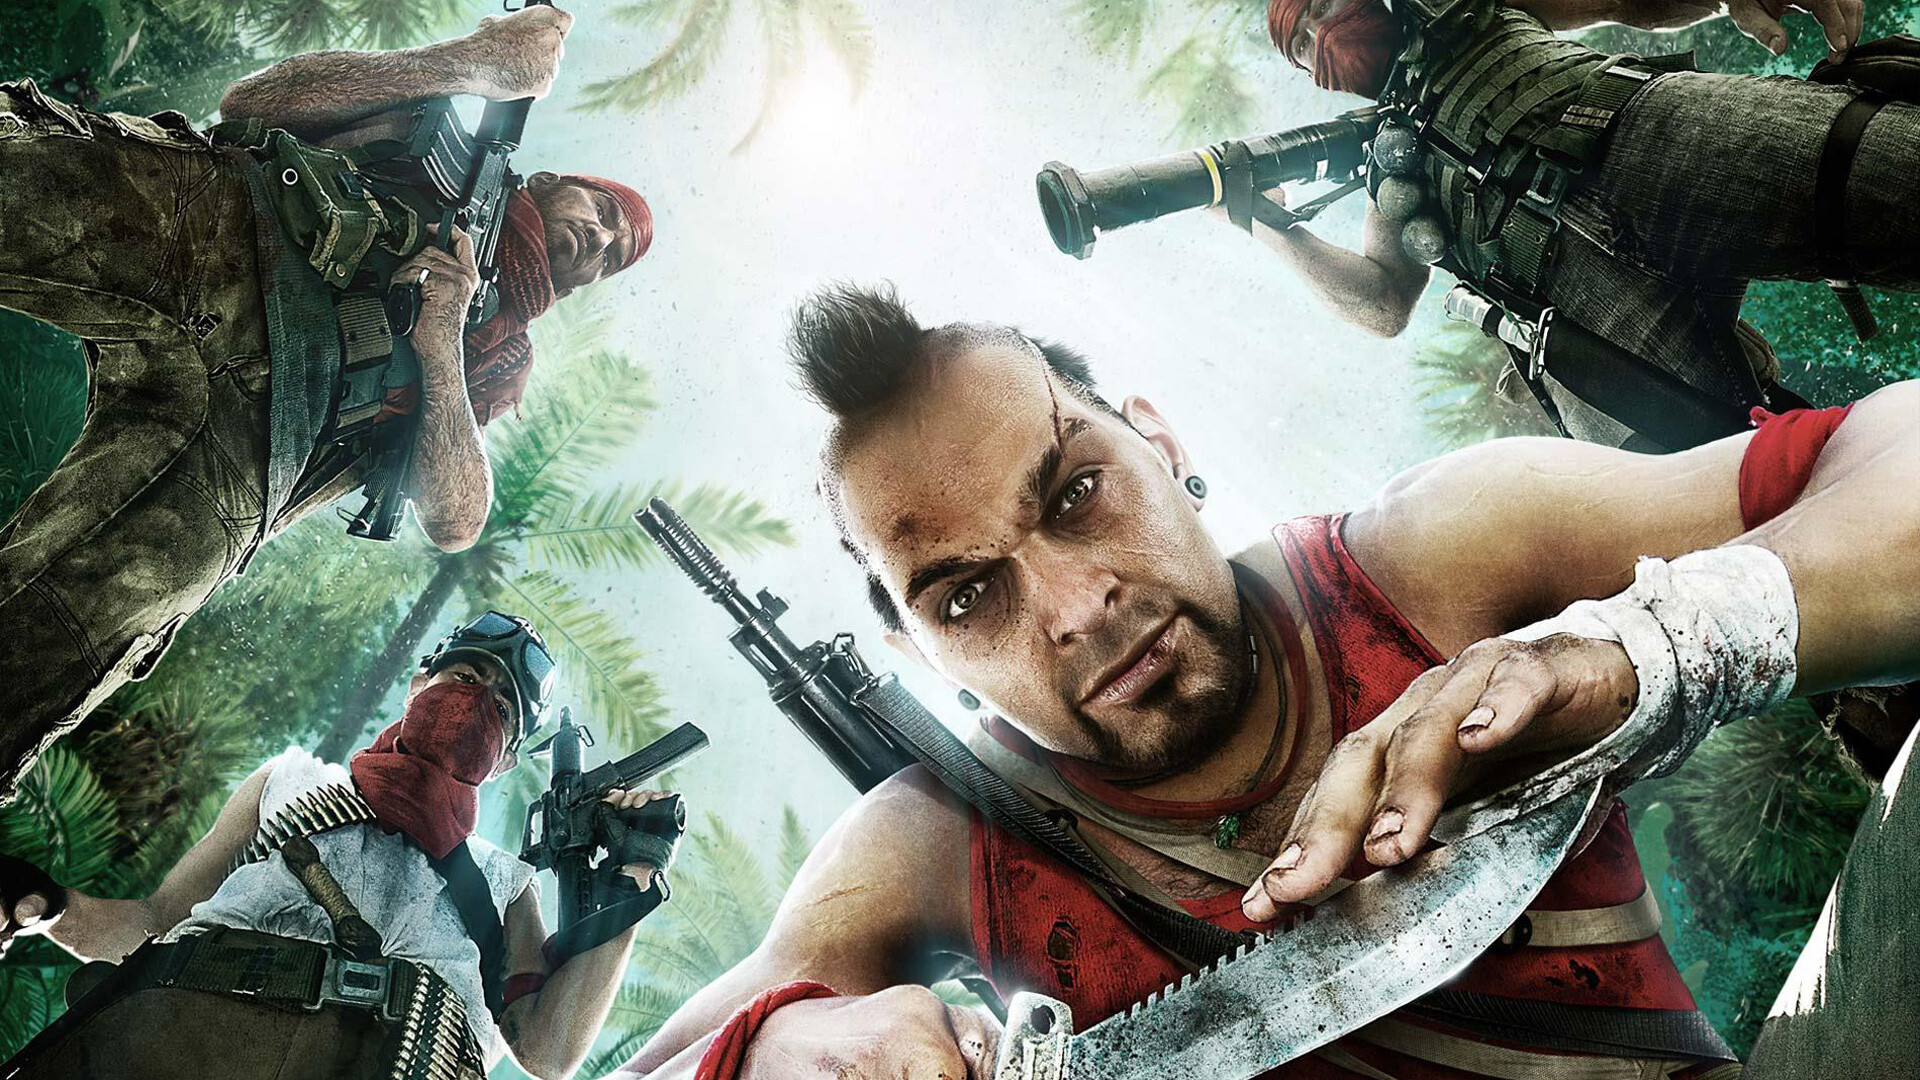 Far Cry 3: An open-world first-person shooter that was developed by Ubisoft Montreal. 1920x1080 Full HD Wallpaper.